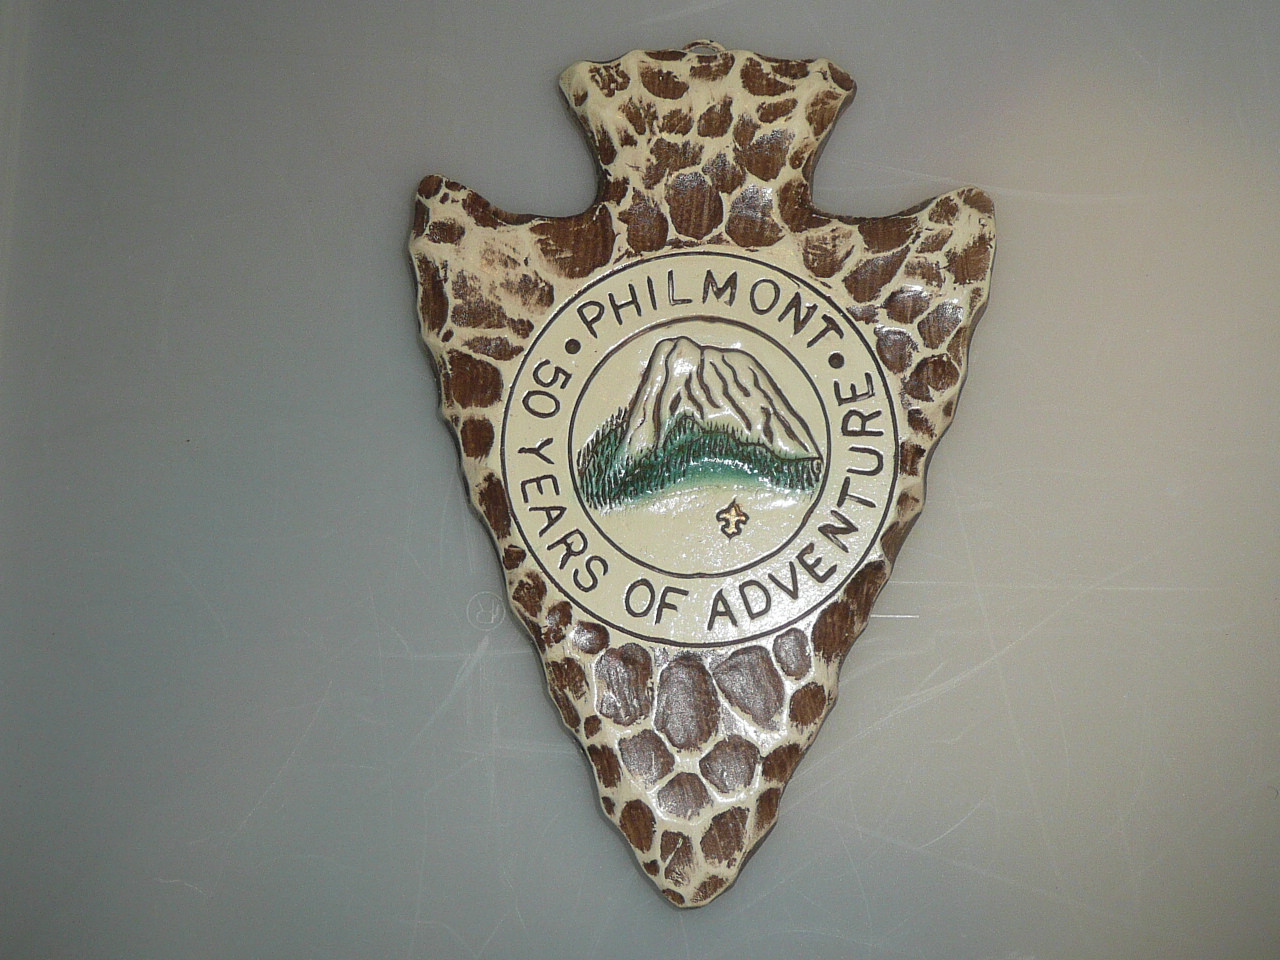 Philmont Scout Ranch Plaster Wall Ornament, Philmont 50th Anniversary